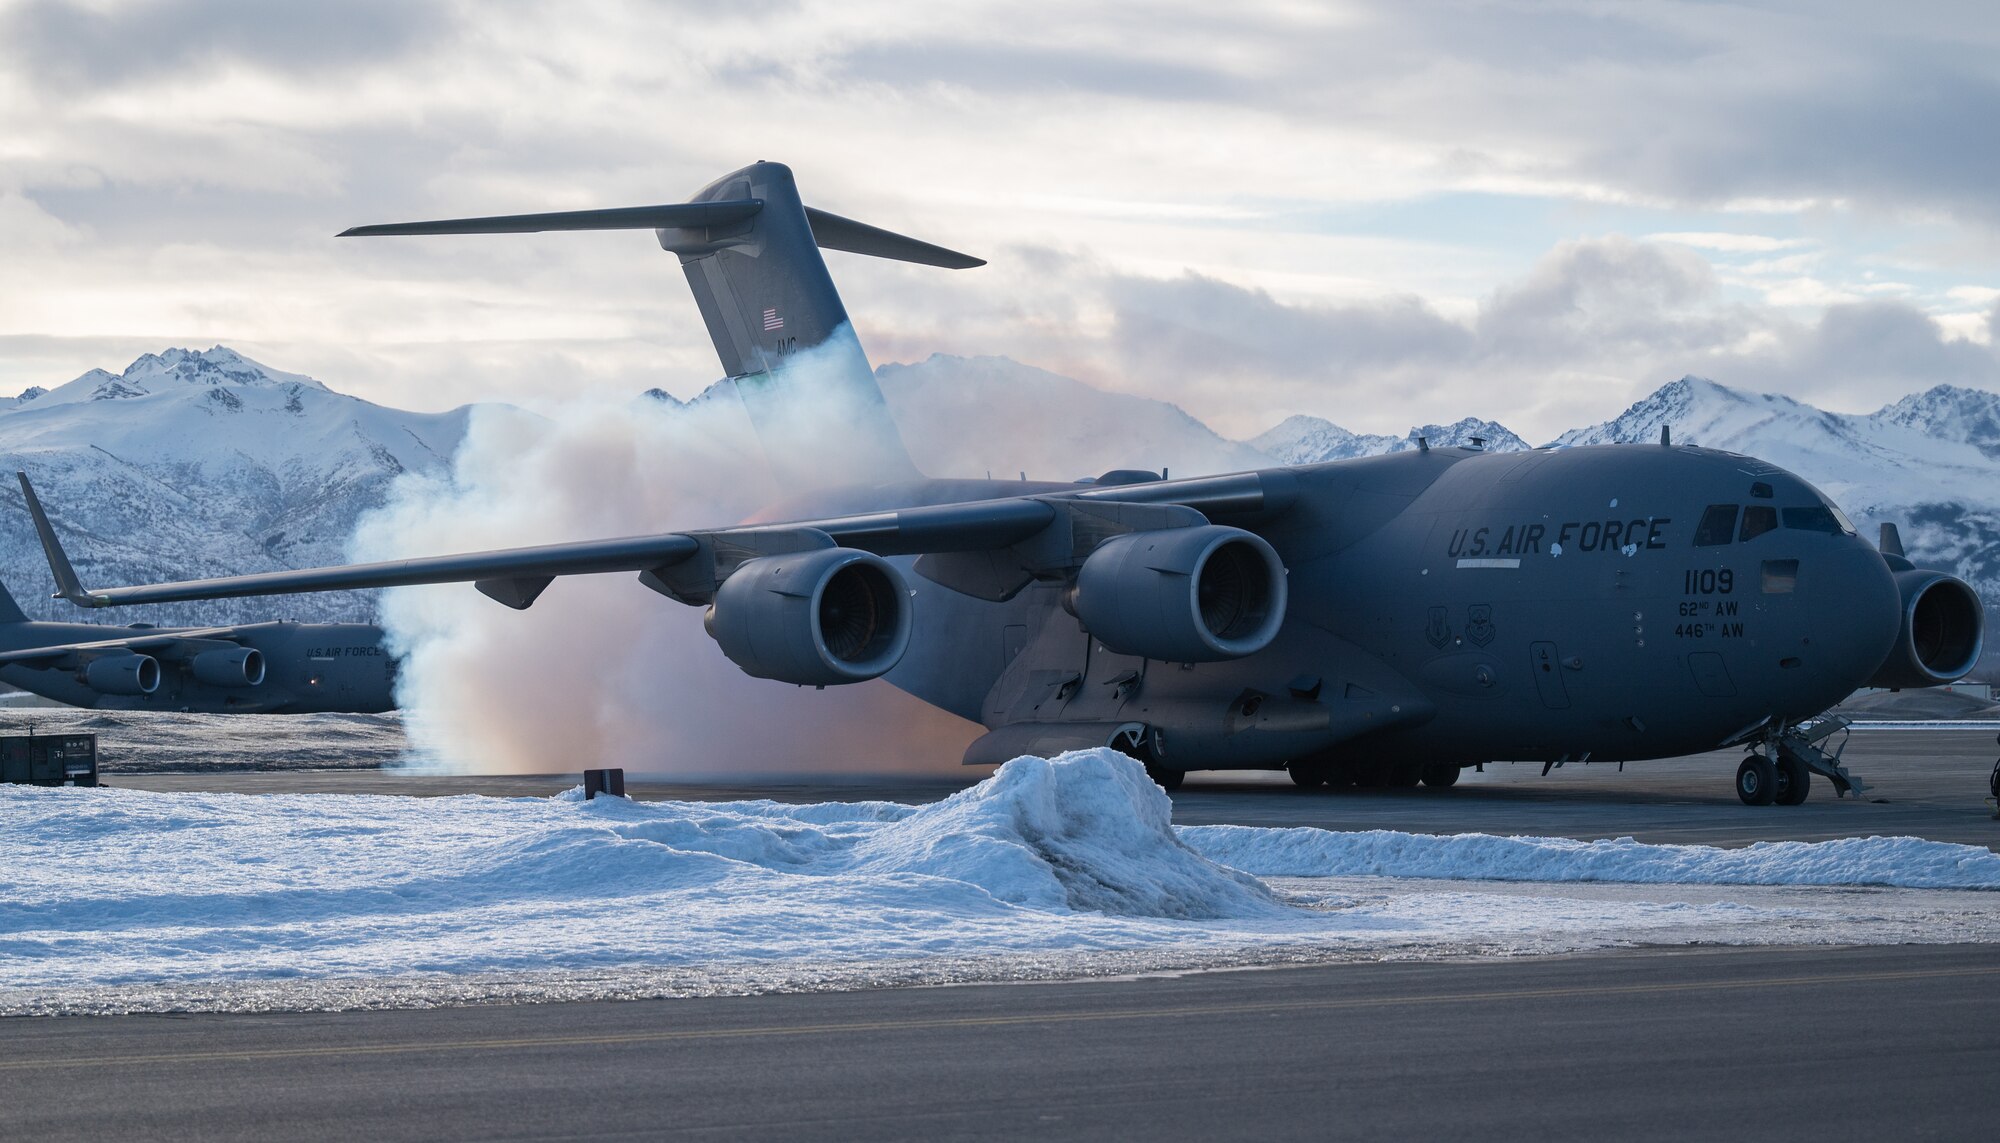 A U.S. Air Force C-17 Globemaster III assigned to Joint Base Lewis-McChord, Washington, starts its engines during Exercise Rainier War 22A at Joint Base Elmendorf-Richardson, Alaska, March 23, 2022. The exercise is designed to demonstrate the 62nd Airlift Wing’s ability to operate and survive while defeating challenges to the U.S. military advantage in all operating domains – air, land, sea and cyberspace. (U.S. Air Force photo by Airman 1st Class Charles Casner)